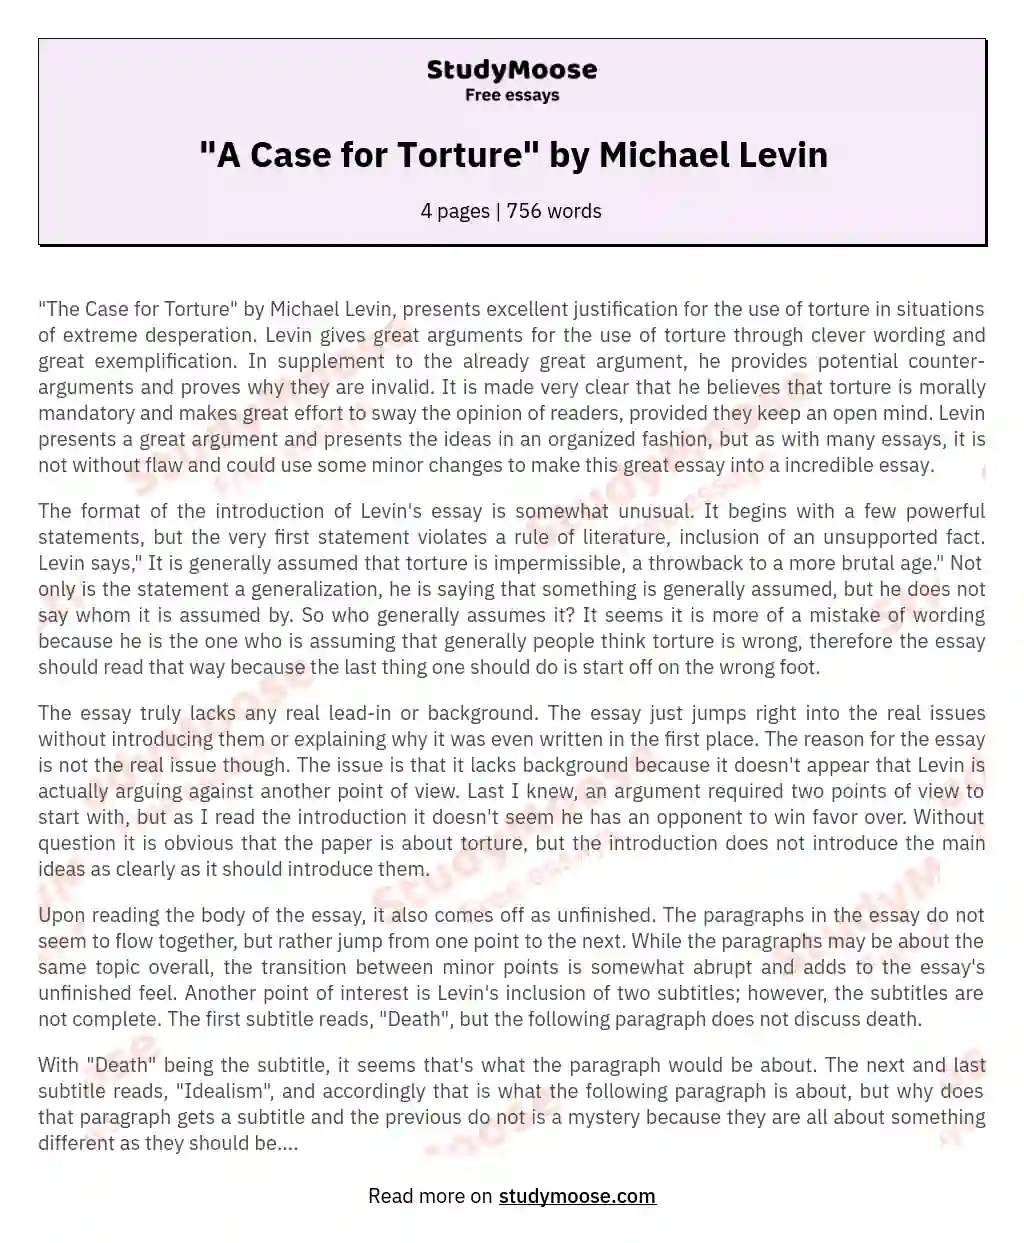 "A Case for Torture" by Michael Levin